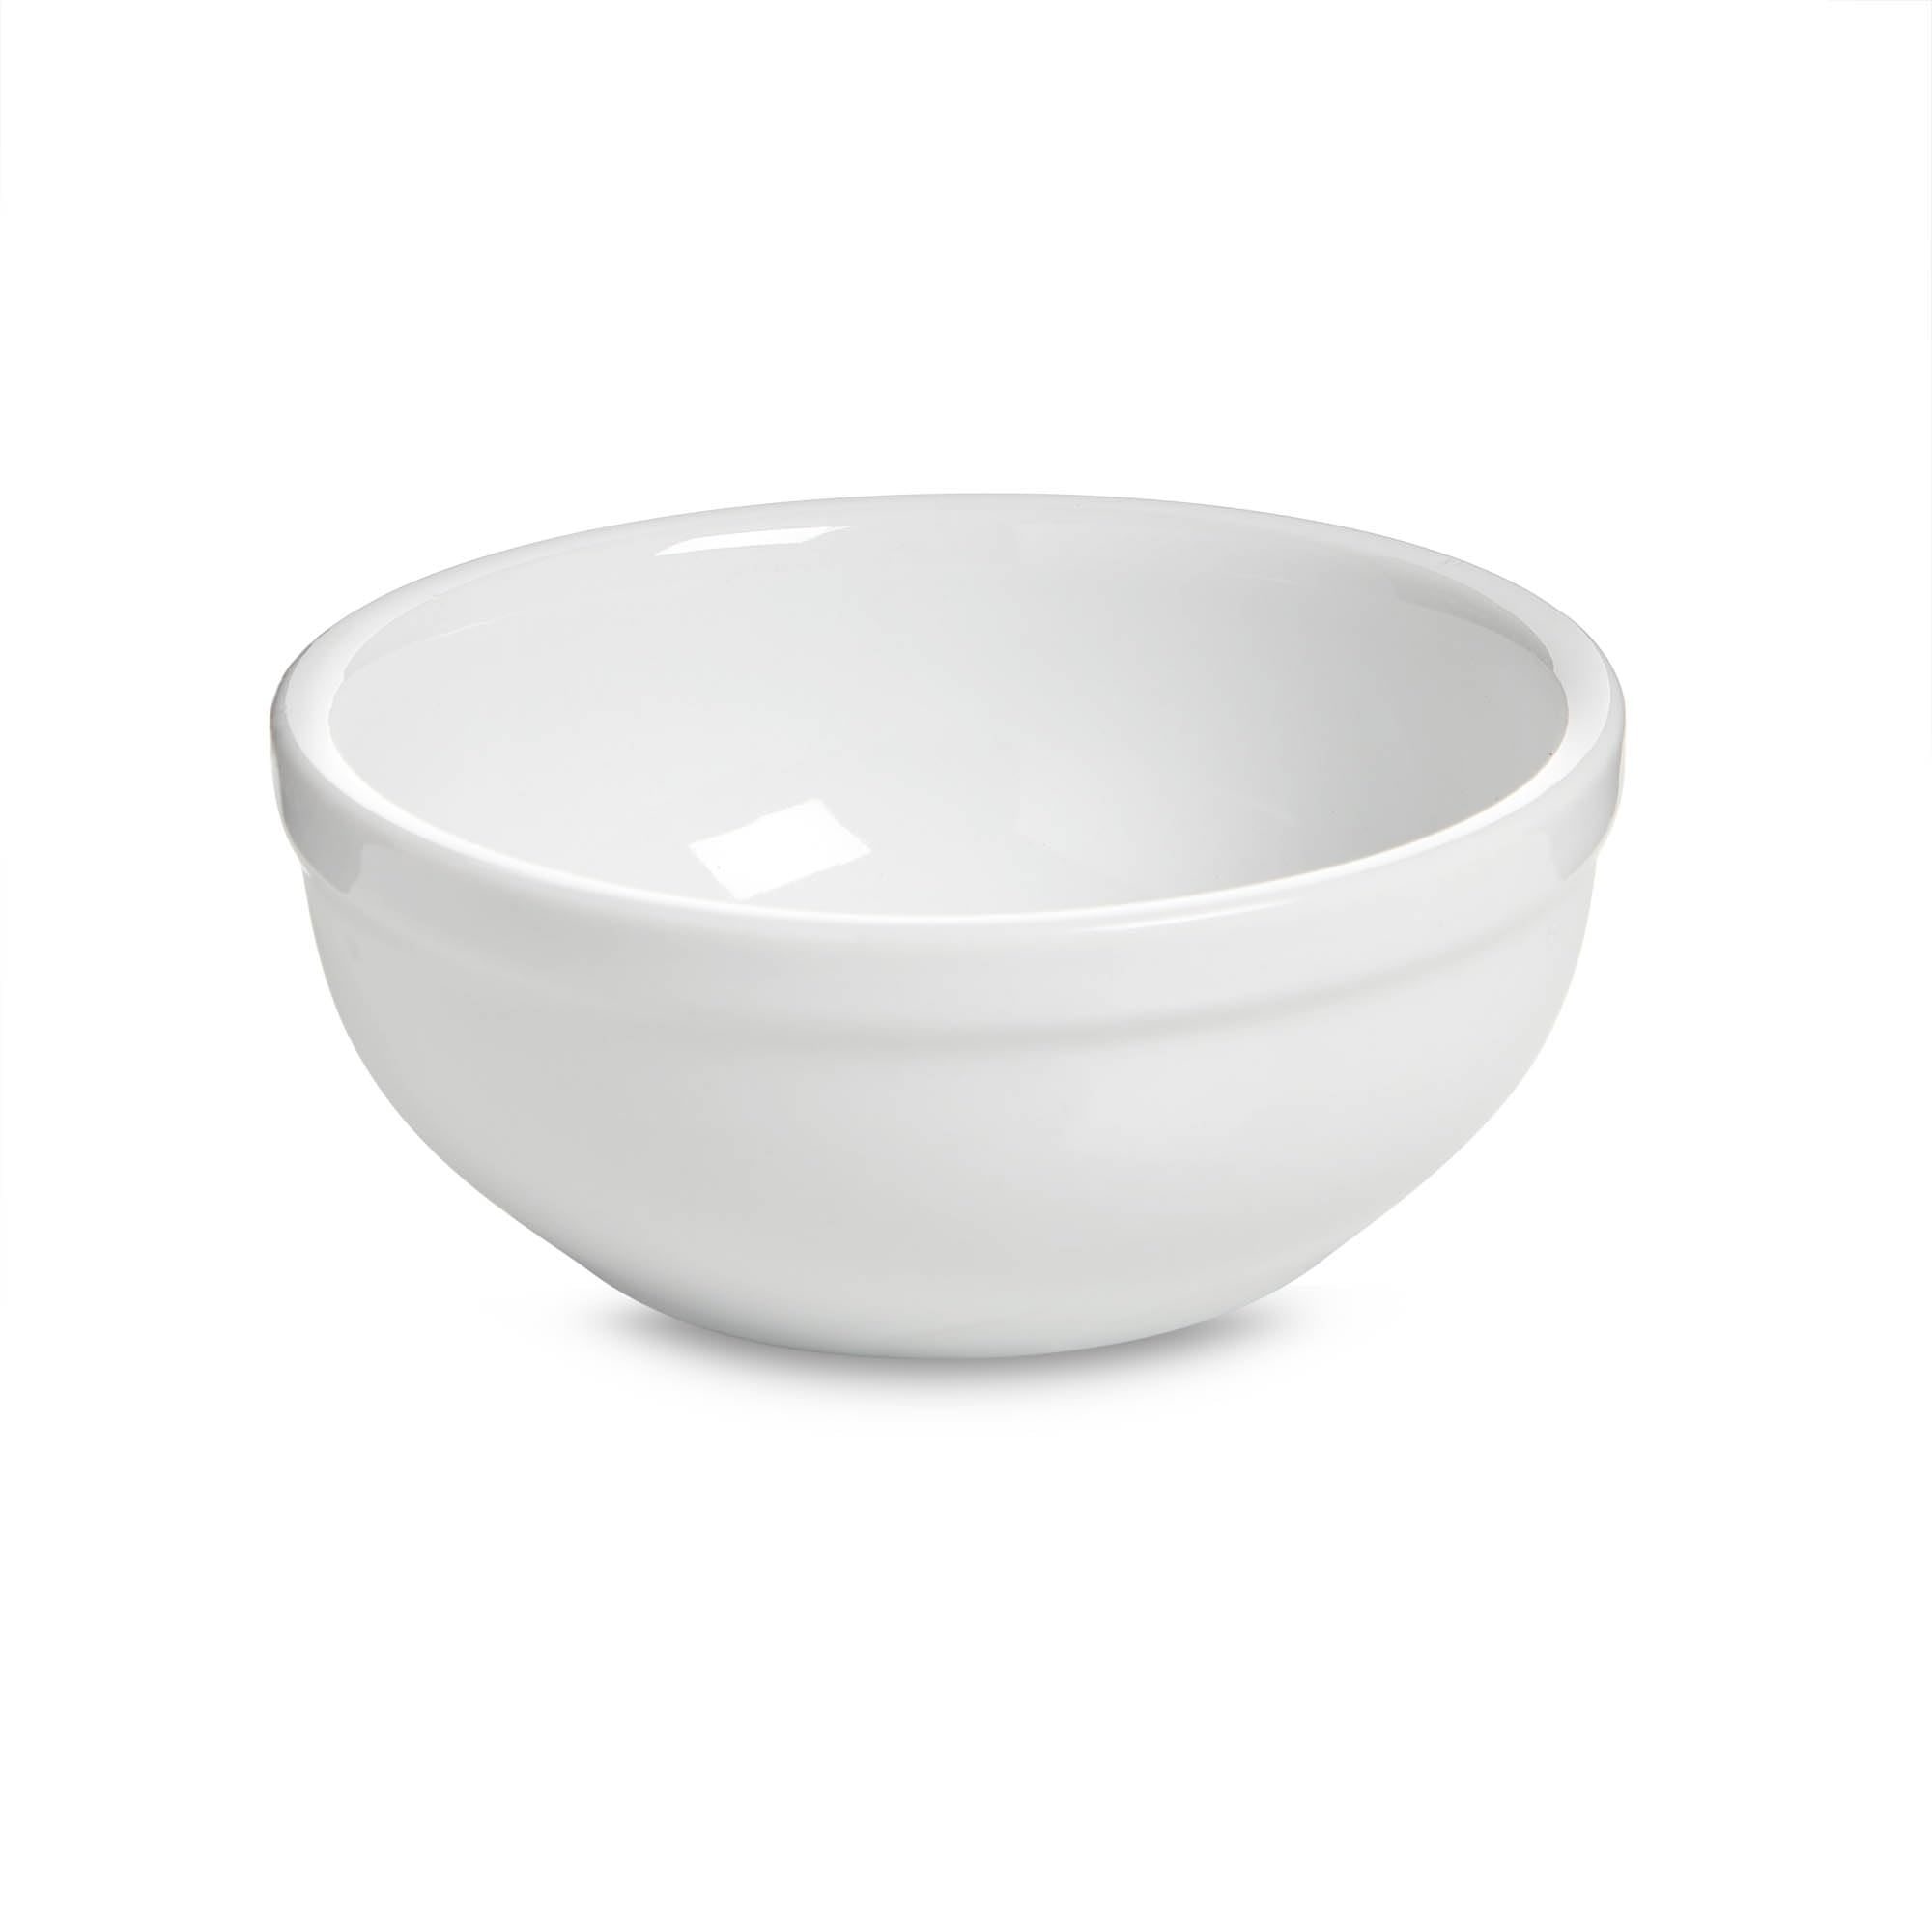 HIC Kitchen Chili, Soup and Cereal Bowls, Set of 4, Fine White Porcelain, 16-ounces